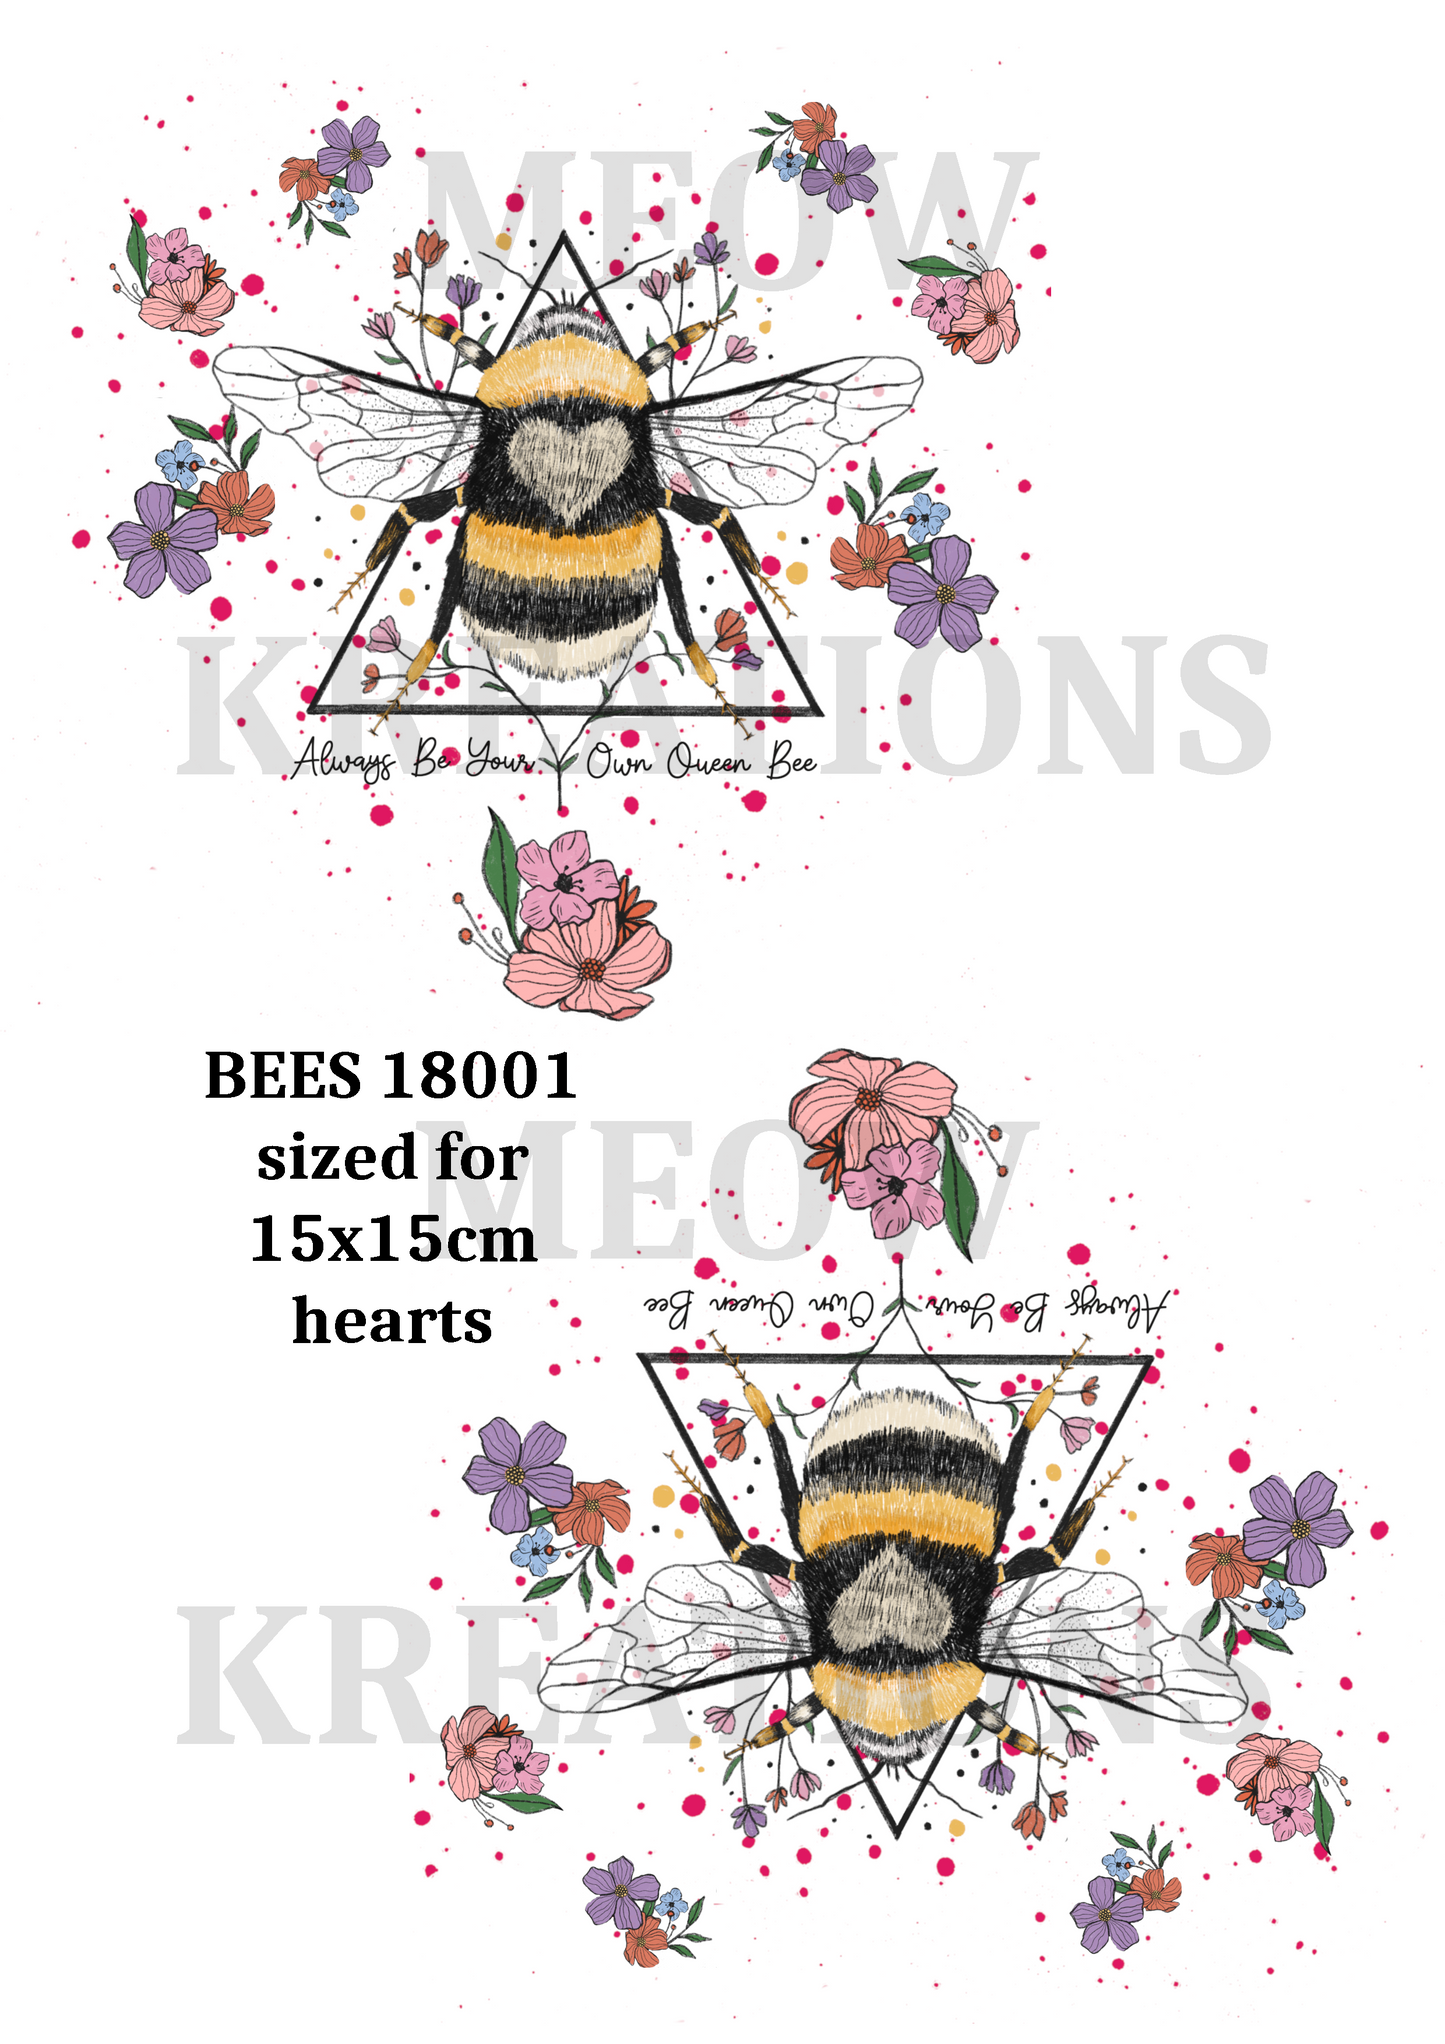 BEES 18001